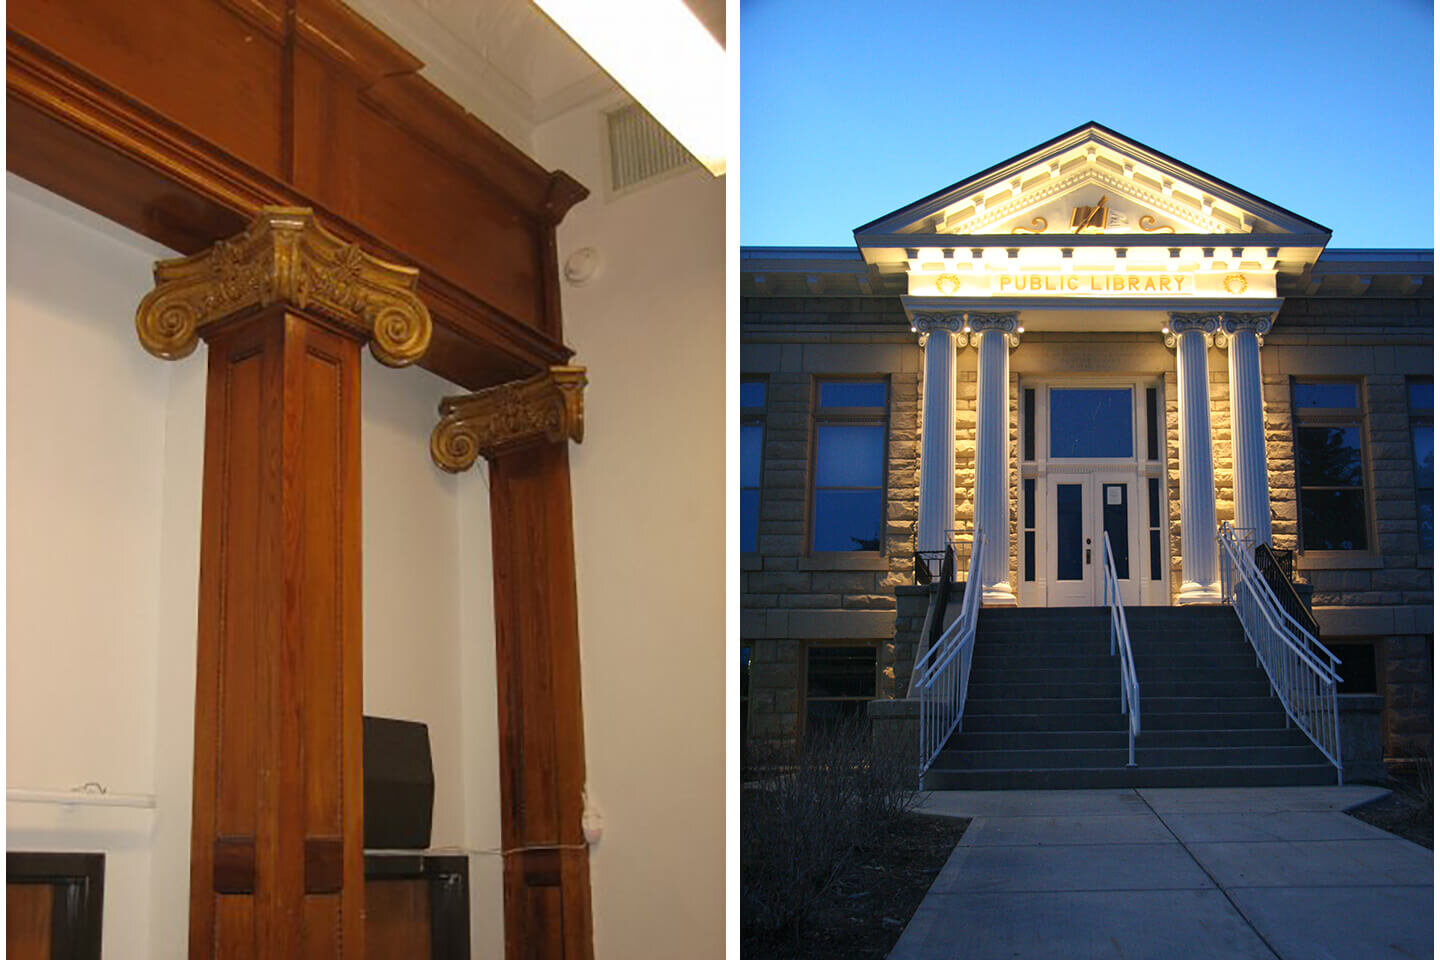 Wooden ionic columns and lit up library entrance at twilight